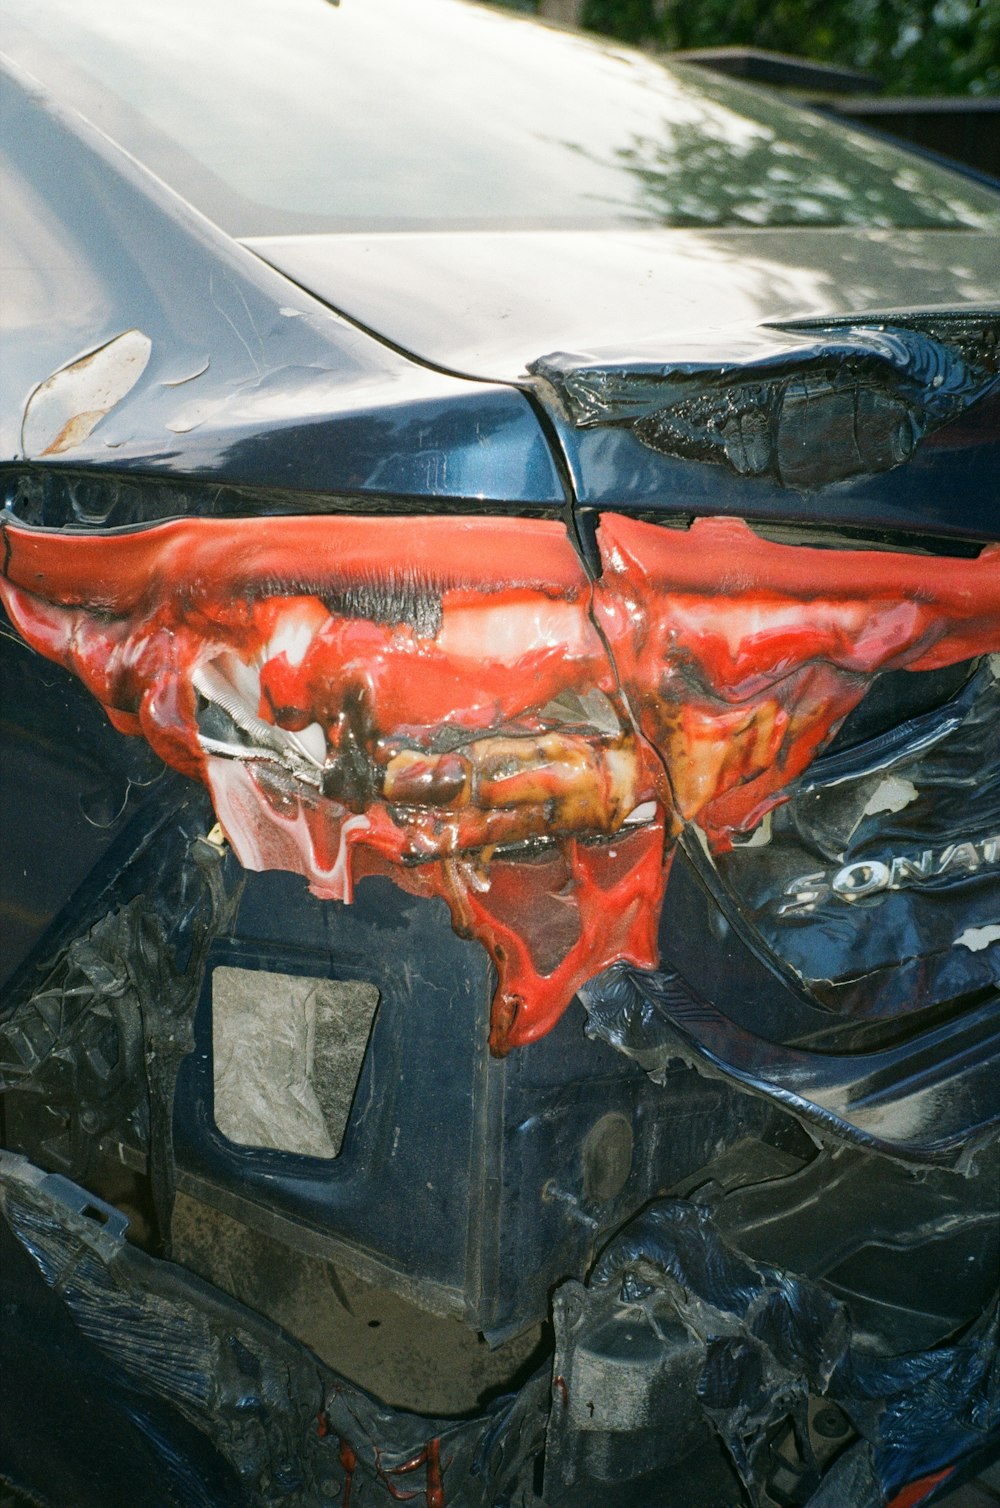 a car with a smashed front end